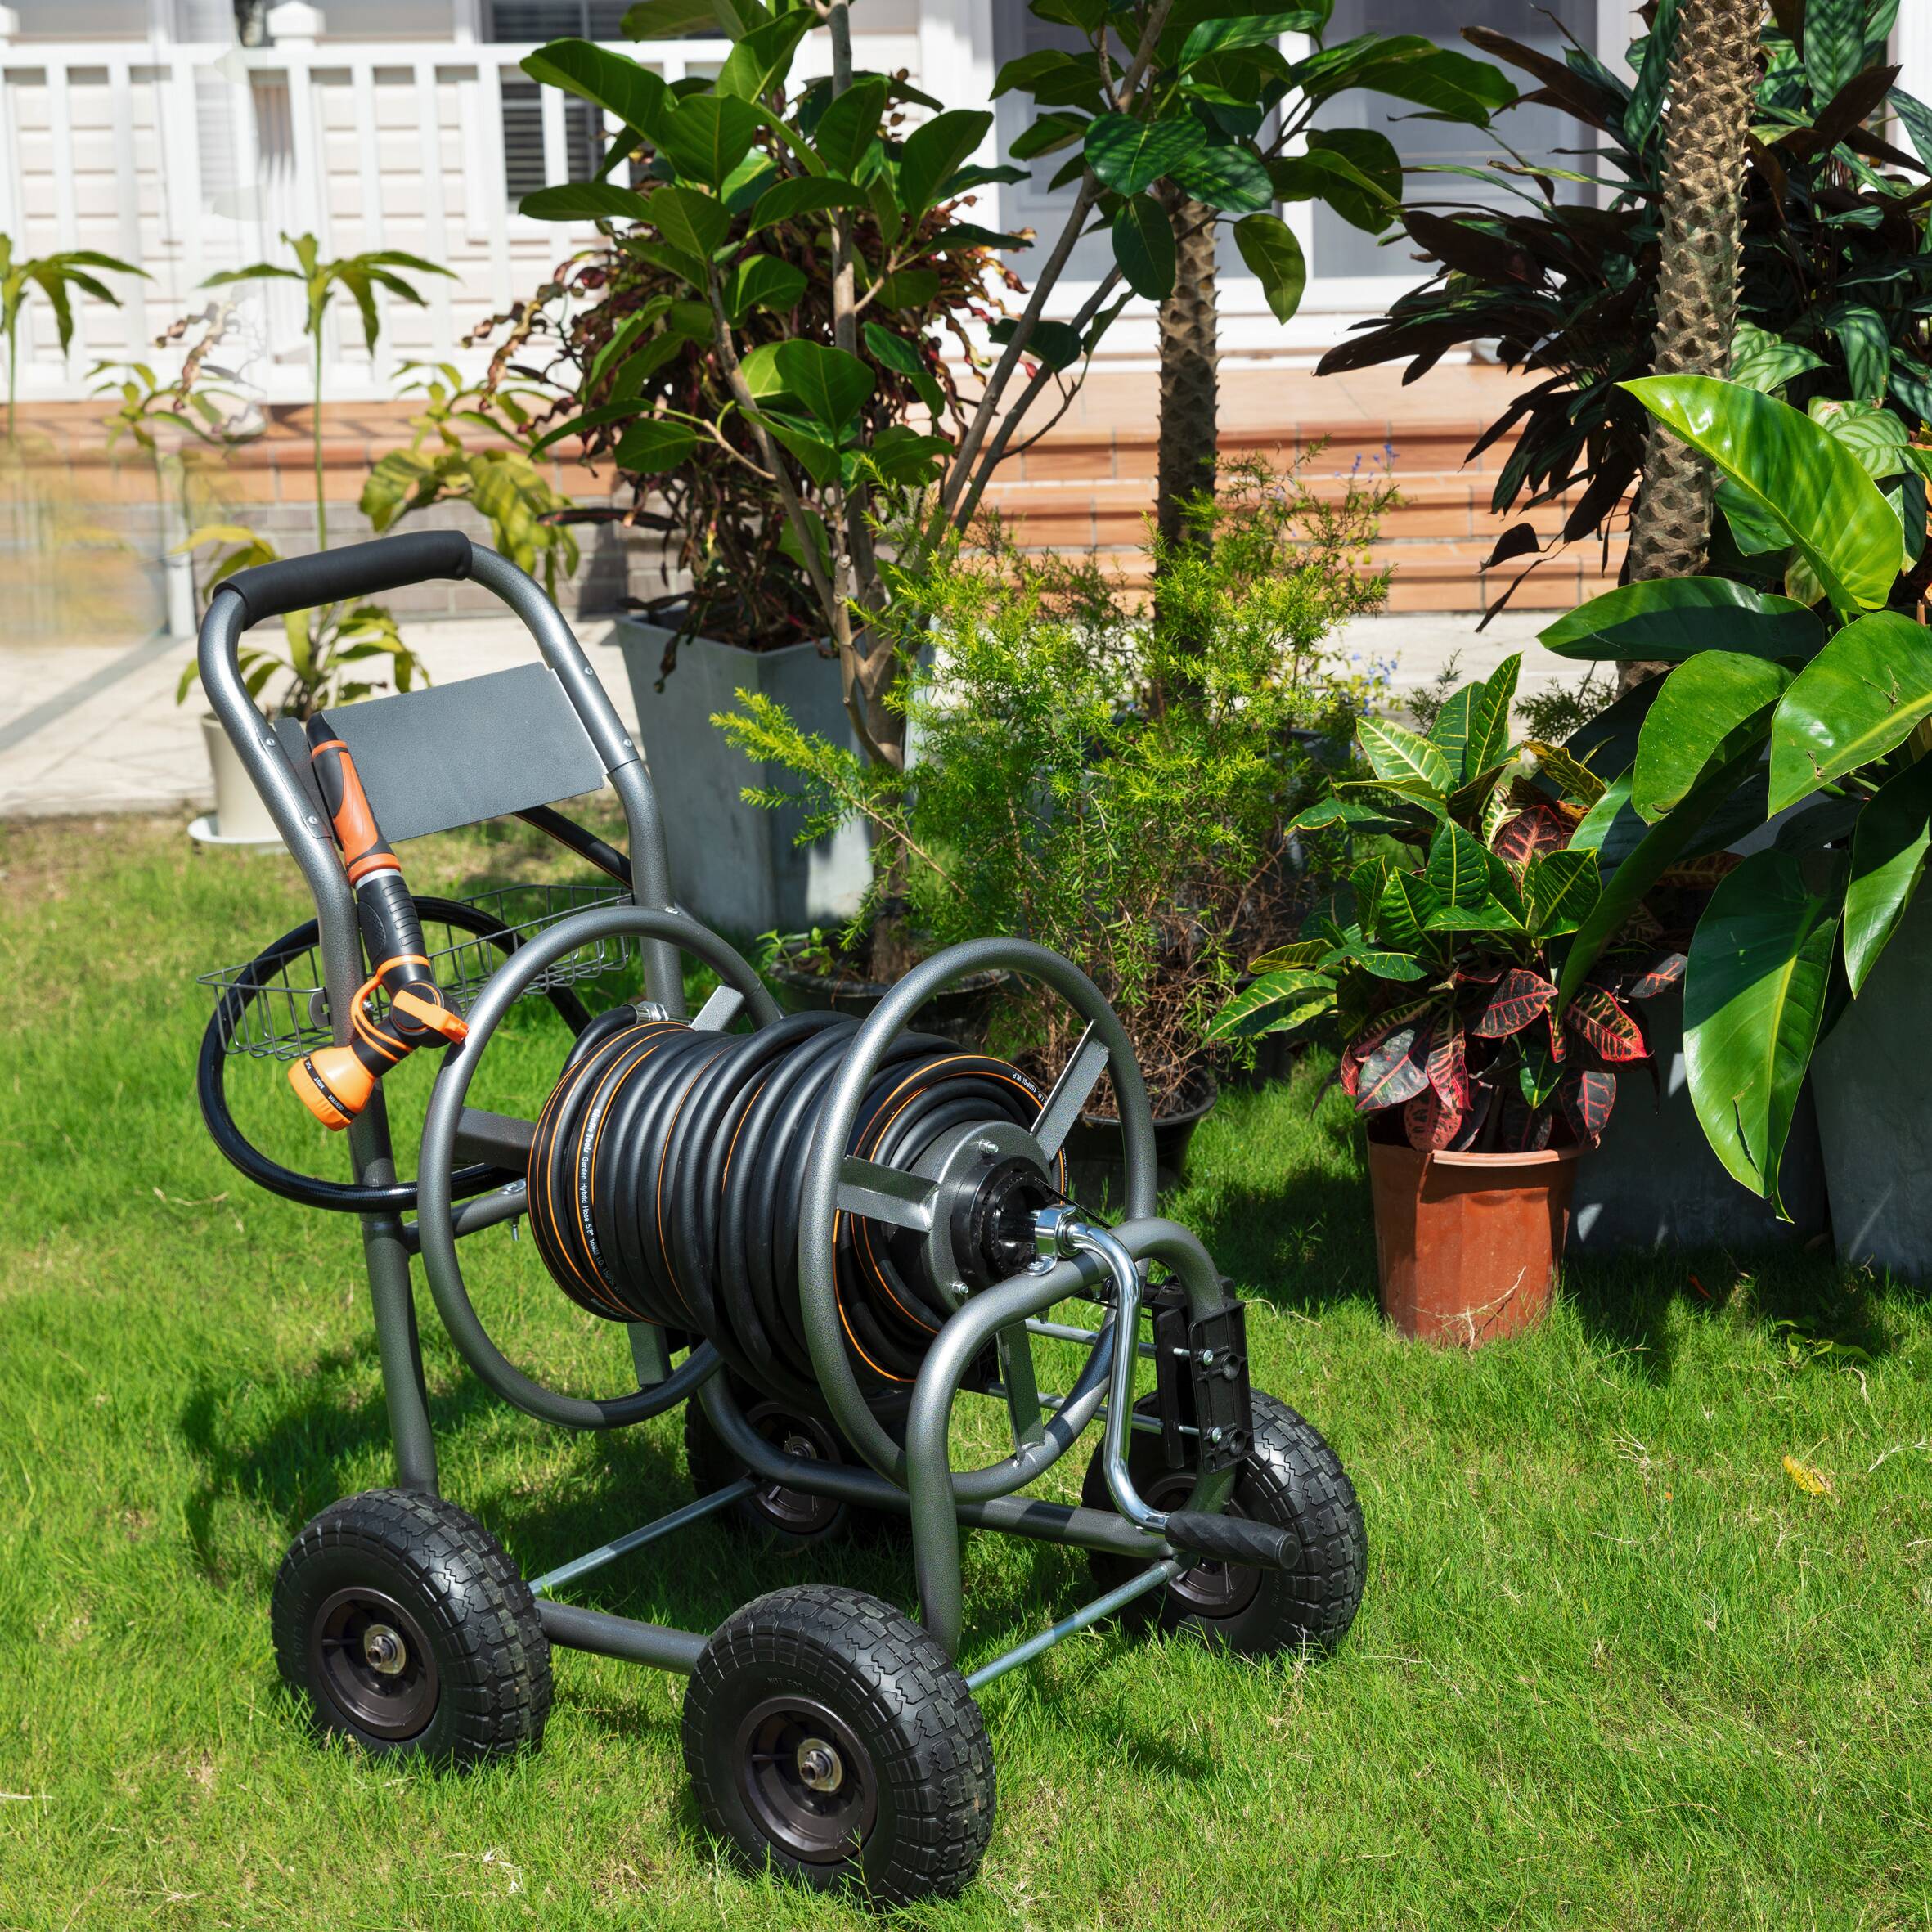 Repairing Your Garden Hose Reel: Tools and Parts You'll Need – Yard Butler